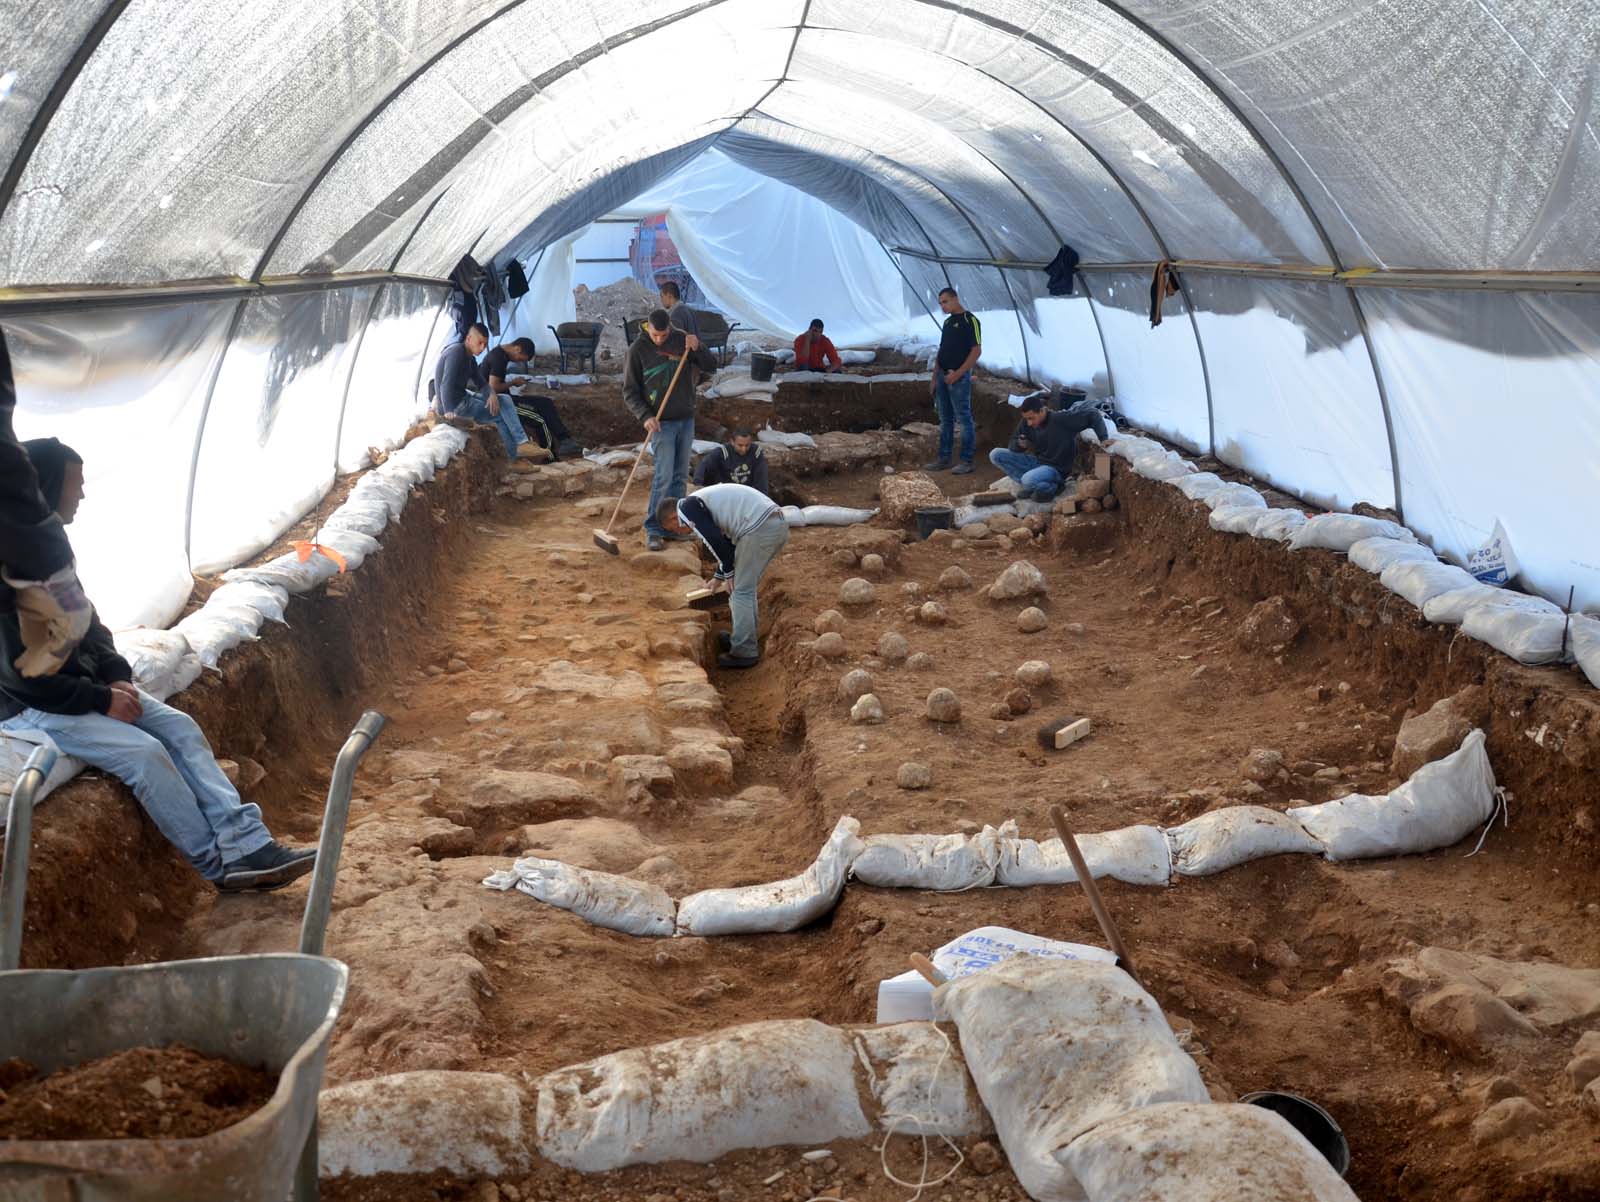 Israel Antiquities Authority excavation site in the Russian Compound of Jerusalem where scientists uncovered the Third Wall that surrounded the city in 70 CE. Photo by Yoli Shwartz/Israel Antiquities Authority